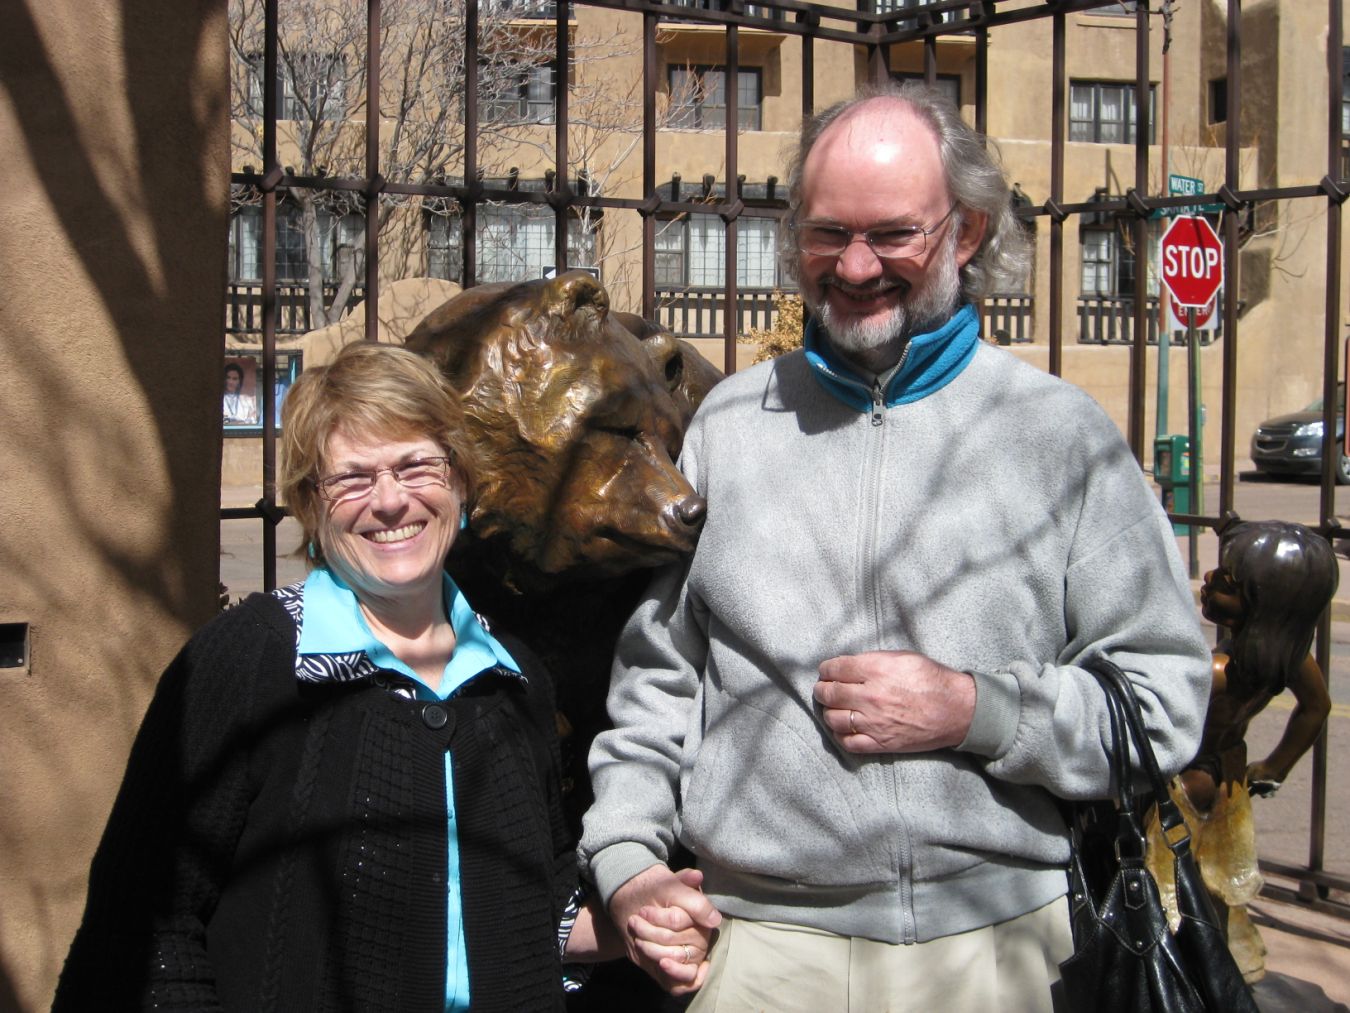 Judy, a sculpture of a bear, and me in Sante Fe, New Mexico.